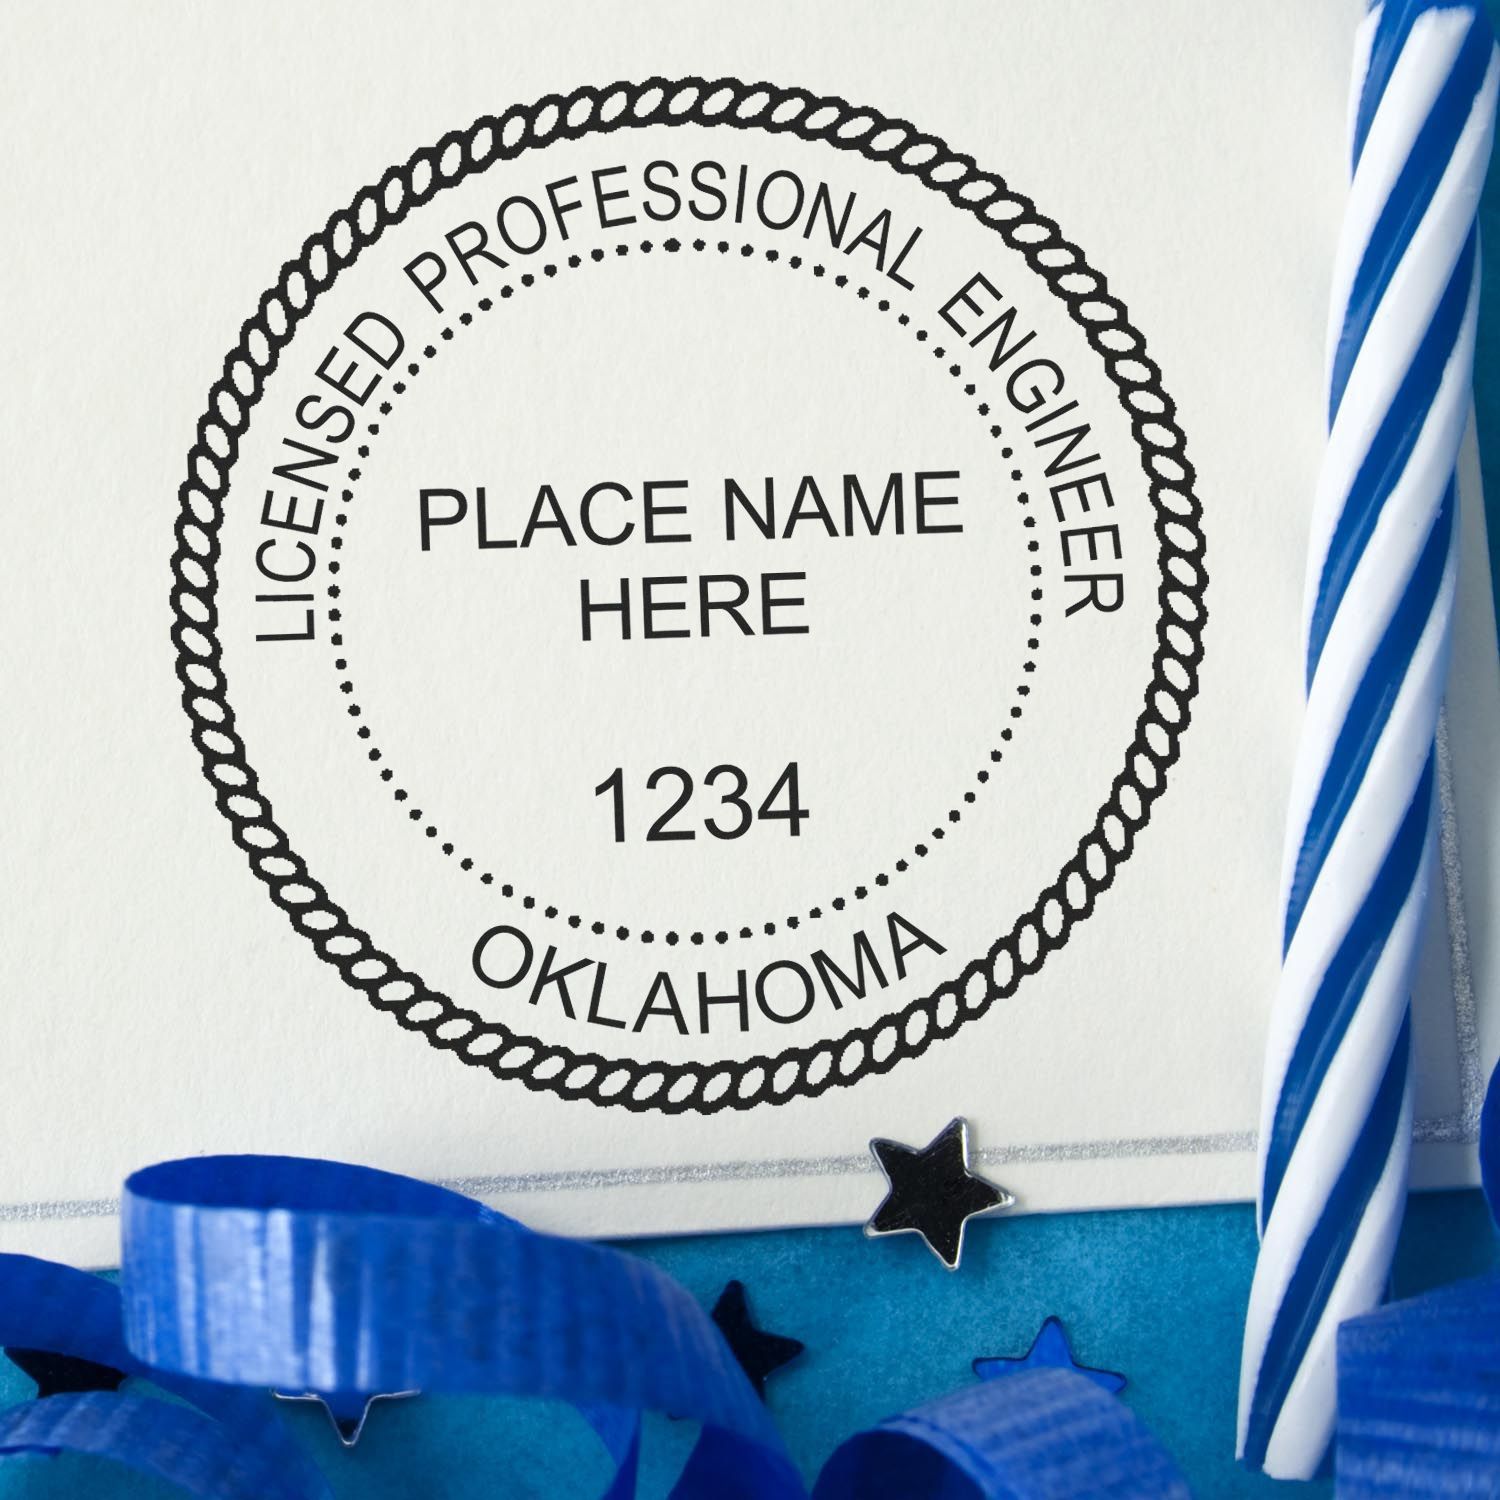 This paper is stamped with a sample imprint of the Oklahoma Professional Engineer Seal Stamp, signifying its quality and reliability.